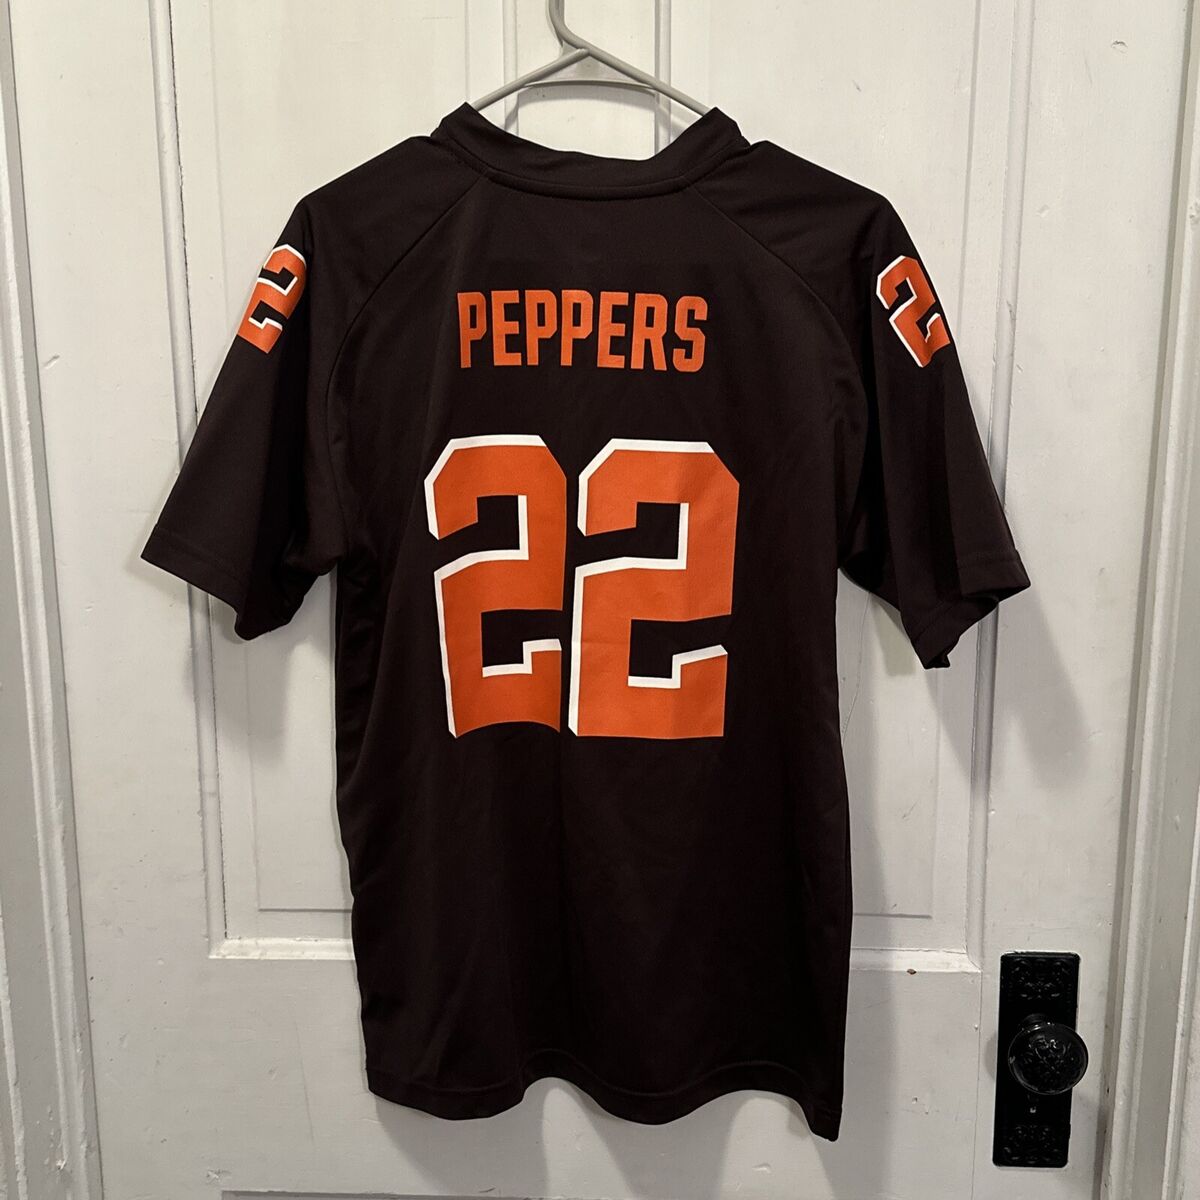 Cleveland Browns Jersey Youth XL 18-20 NFL team apparel #22 Peppers